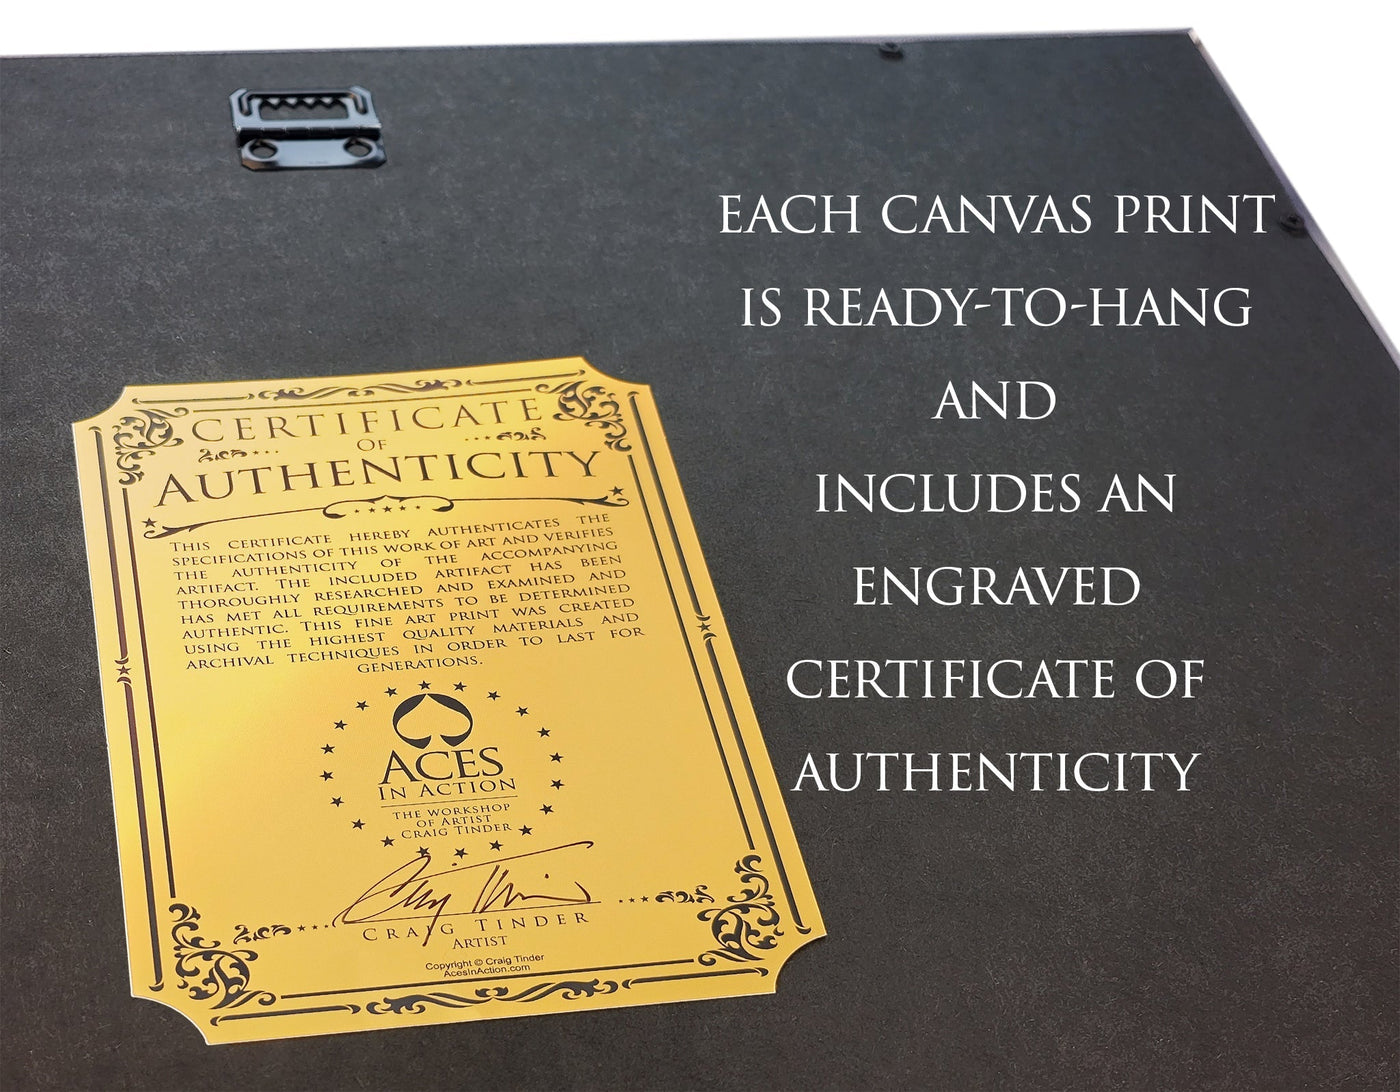 Photo of certificate of authenticity that is attached to the back of each canvas print.